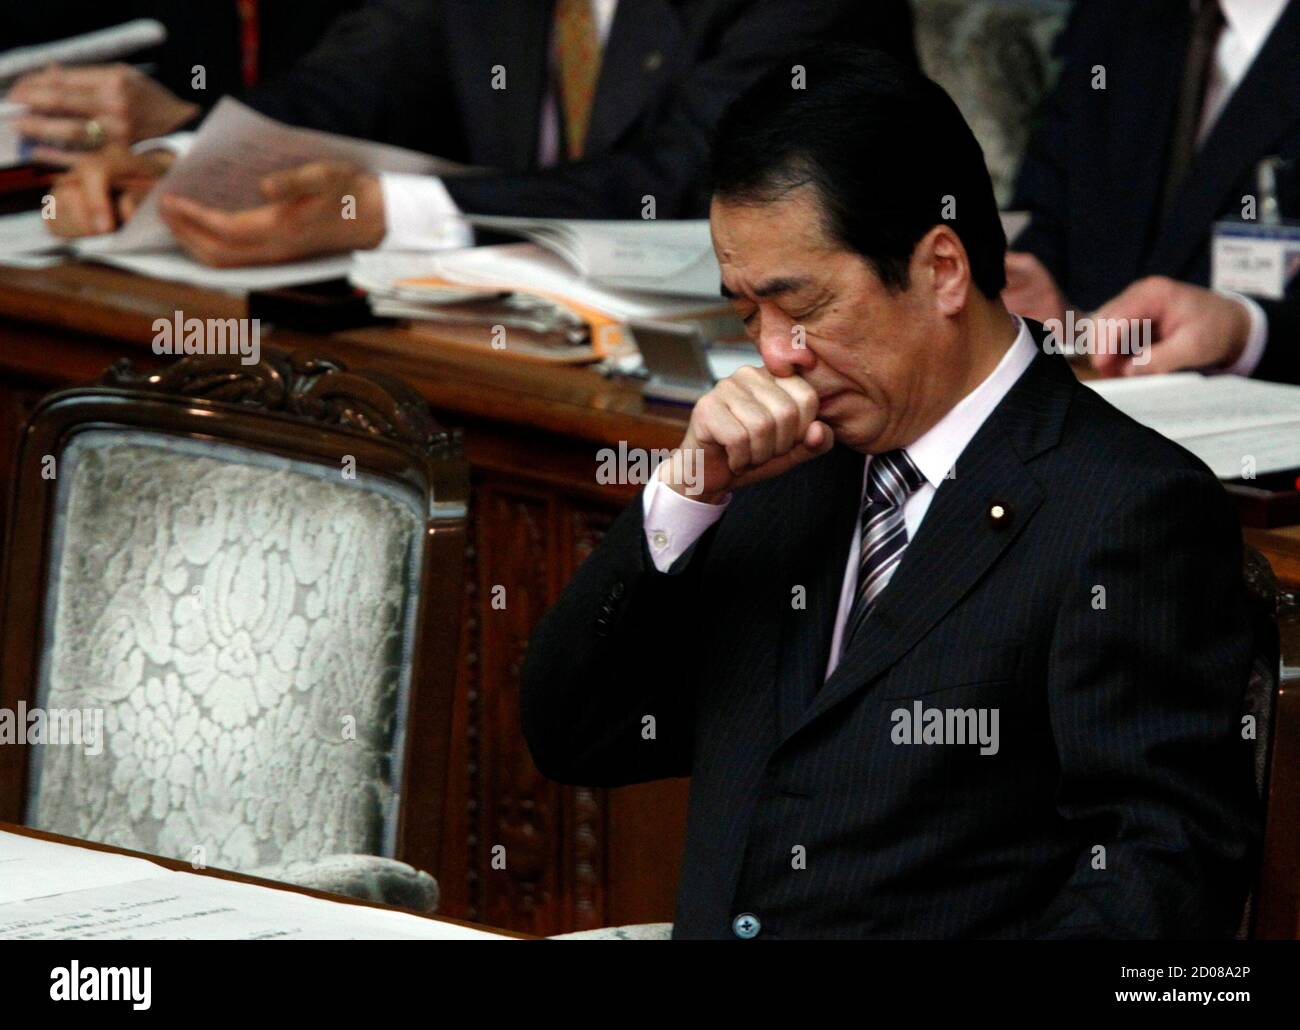 Japan's Prime Minister Naoto Kan attends the start of a regular parliament session at the lower house of parliament in Tokyo January 24, 2011. Kan, facing a divided parliament and doubts over his political survival, on Monday stepped up his campaign for a sales tax rise he argues is vital to pay for huge welfare costs in the fast-ageing society. REUTERS/Issei Kato (JAPAN - Tags: POLITICS BUSINESS) Stock Photo